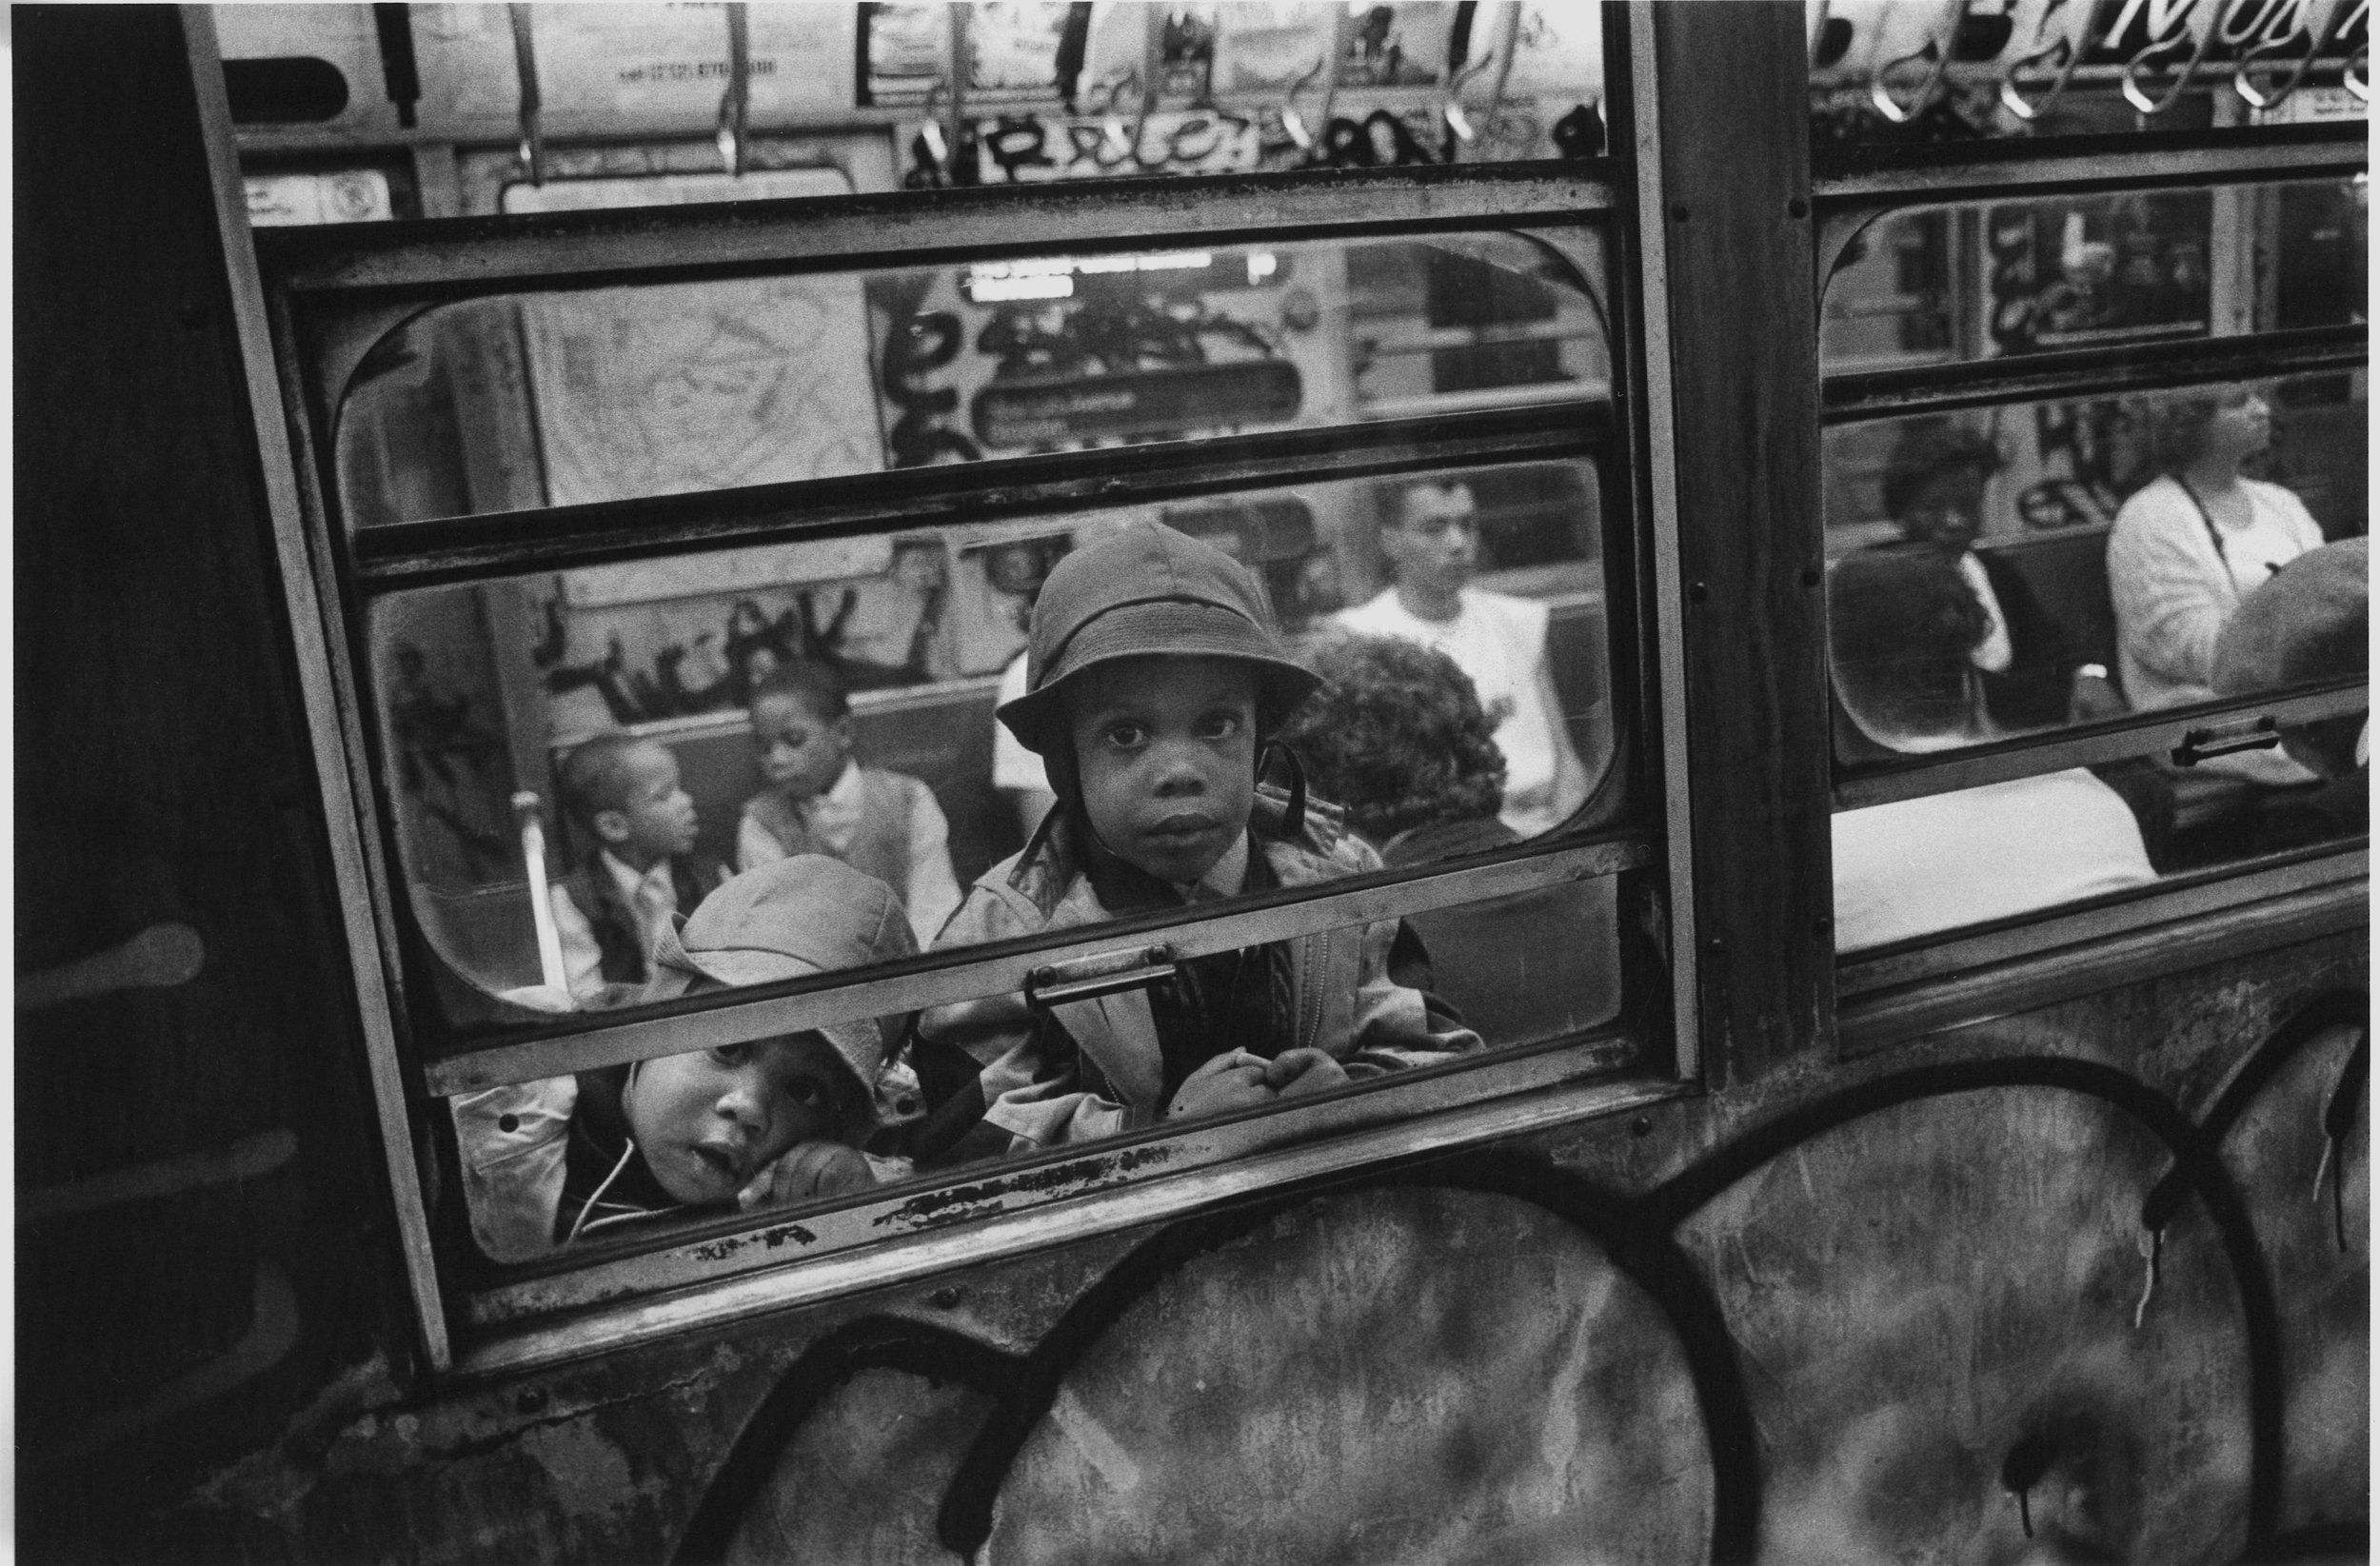 young kids on graff train, nyc, early 1980’s